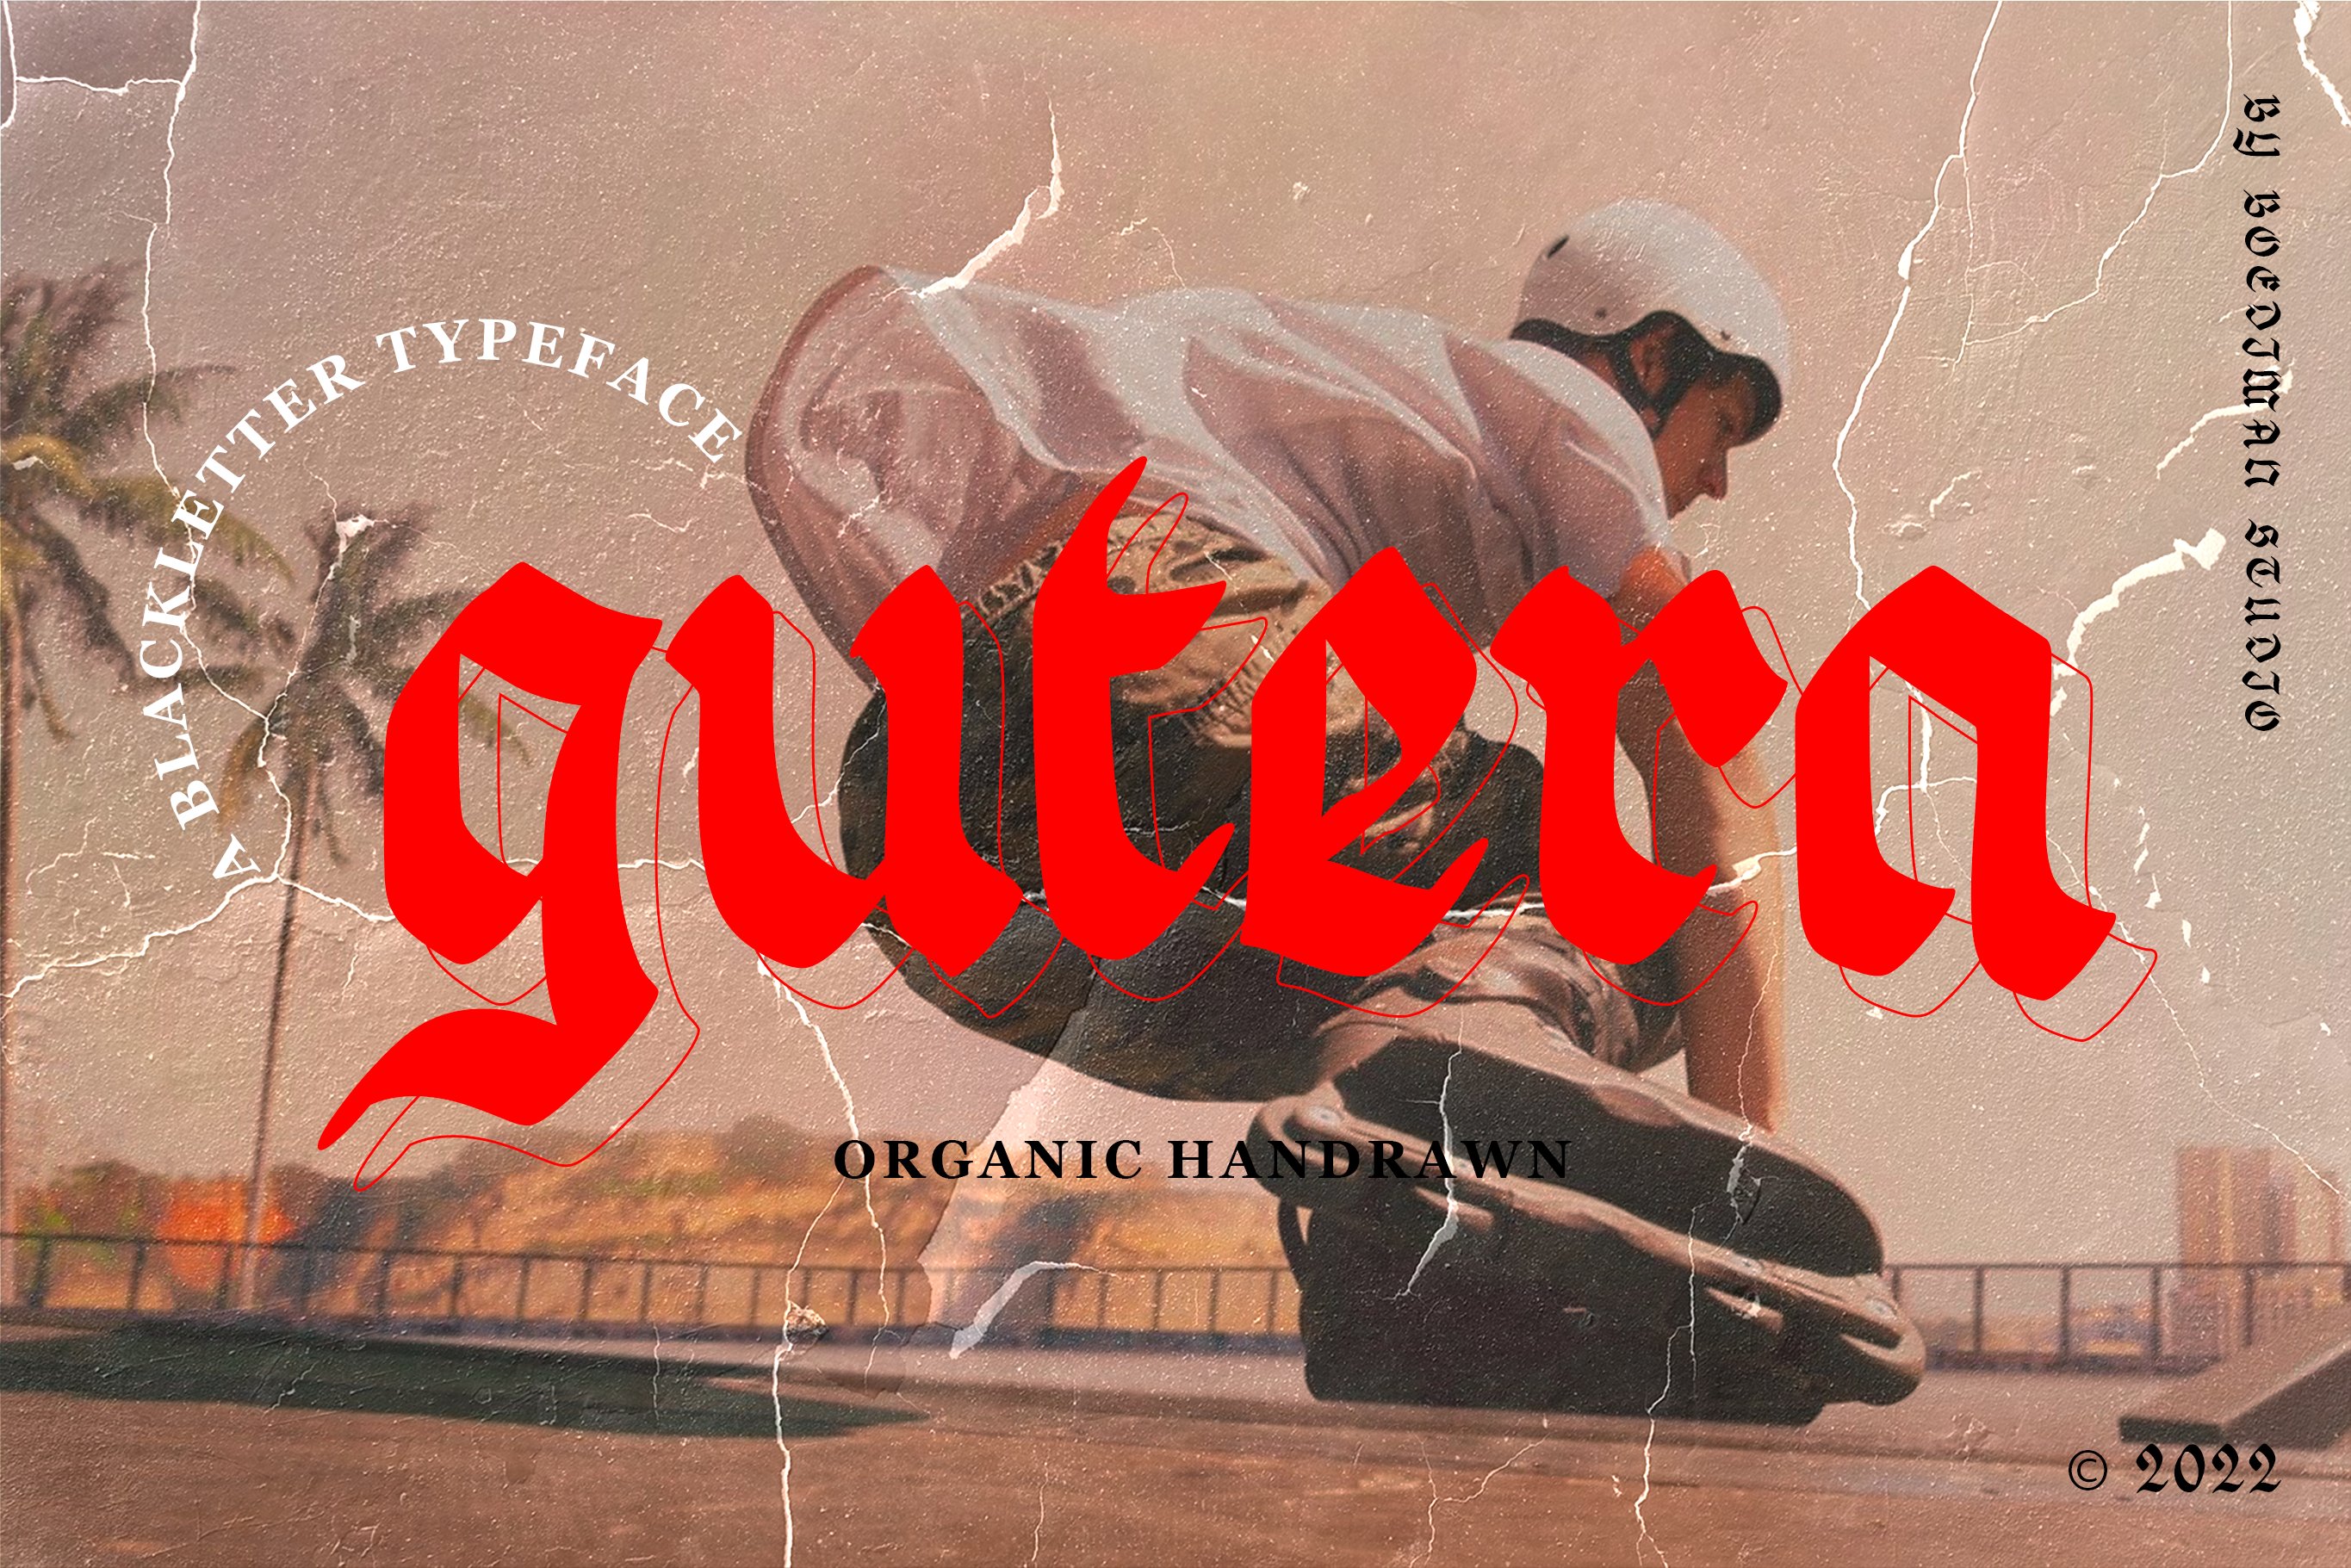 Gutera Typeface cover image.